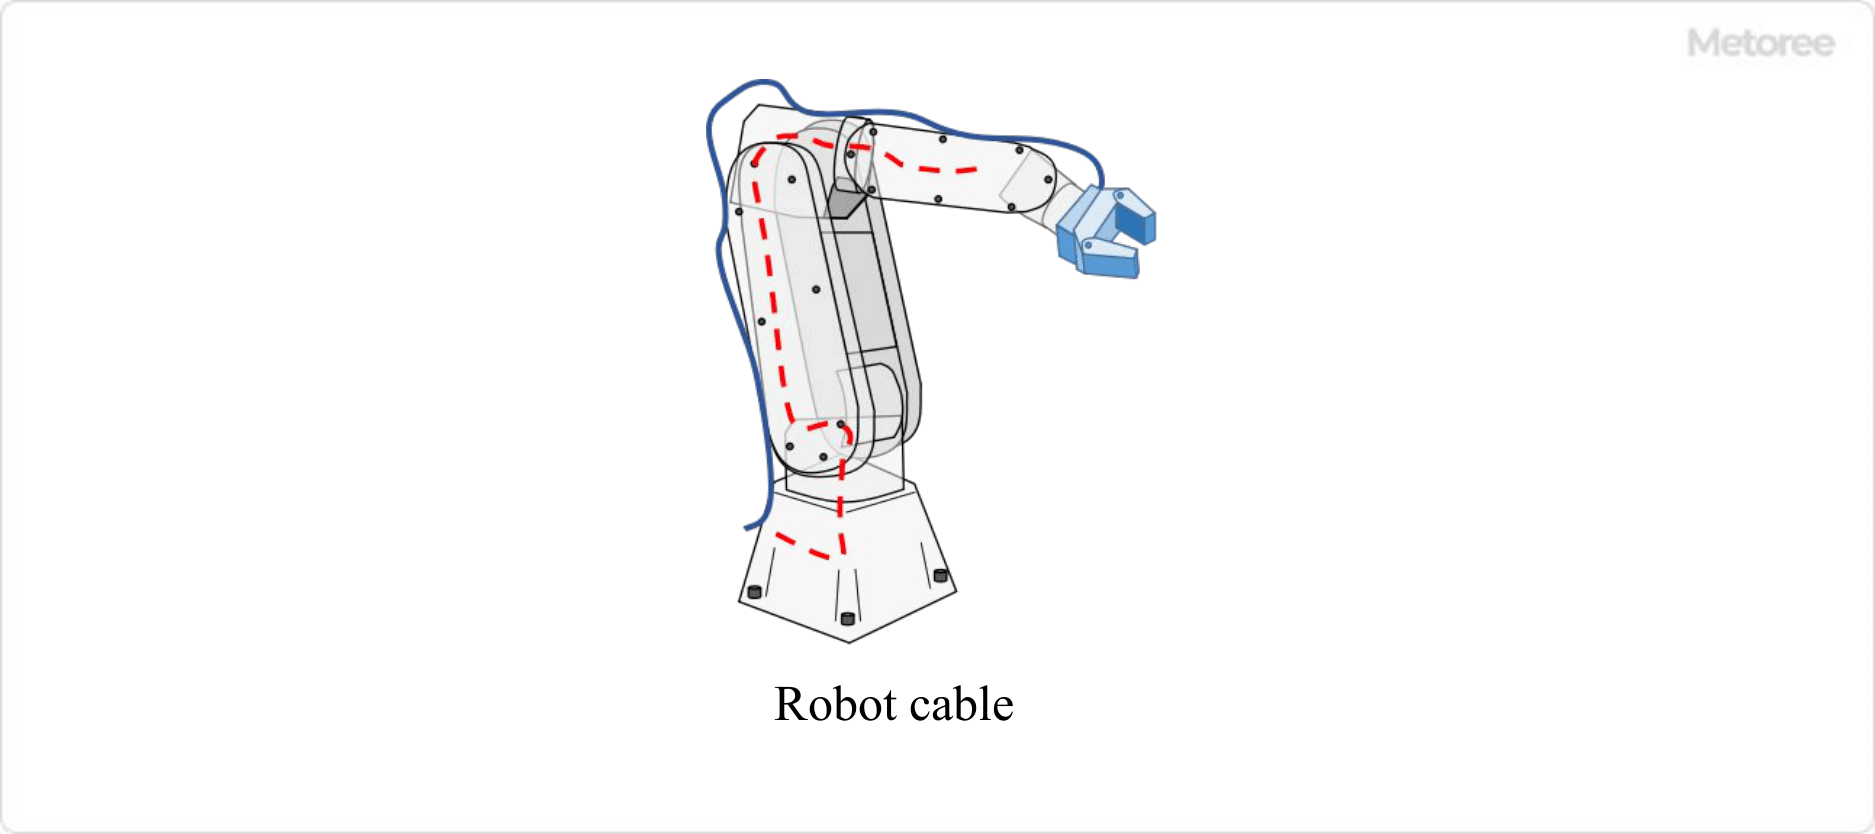 Figure 1. Uses of robot cables